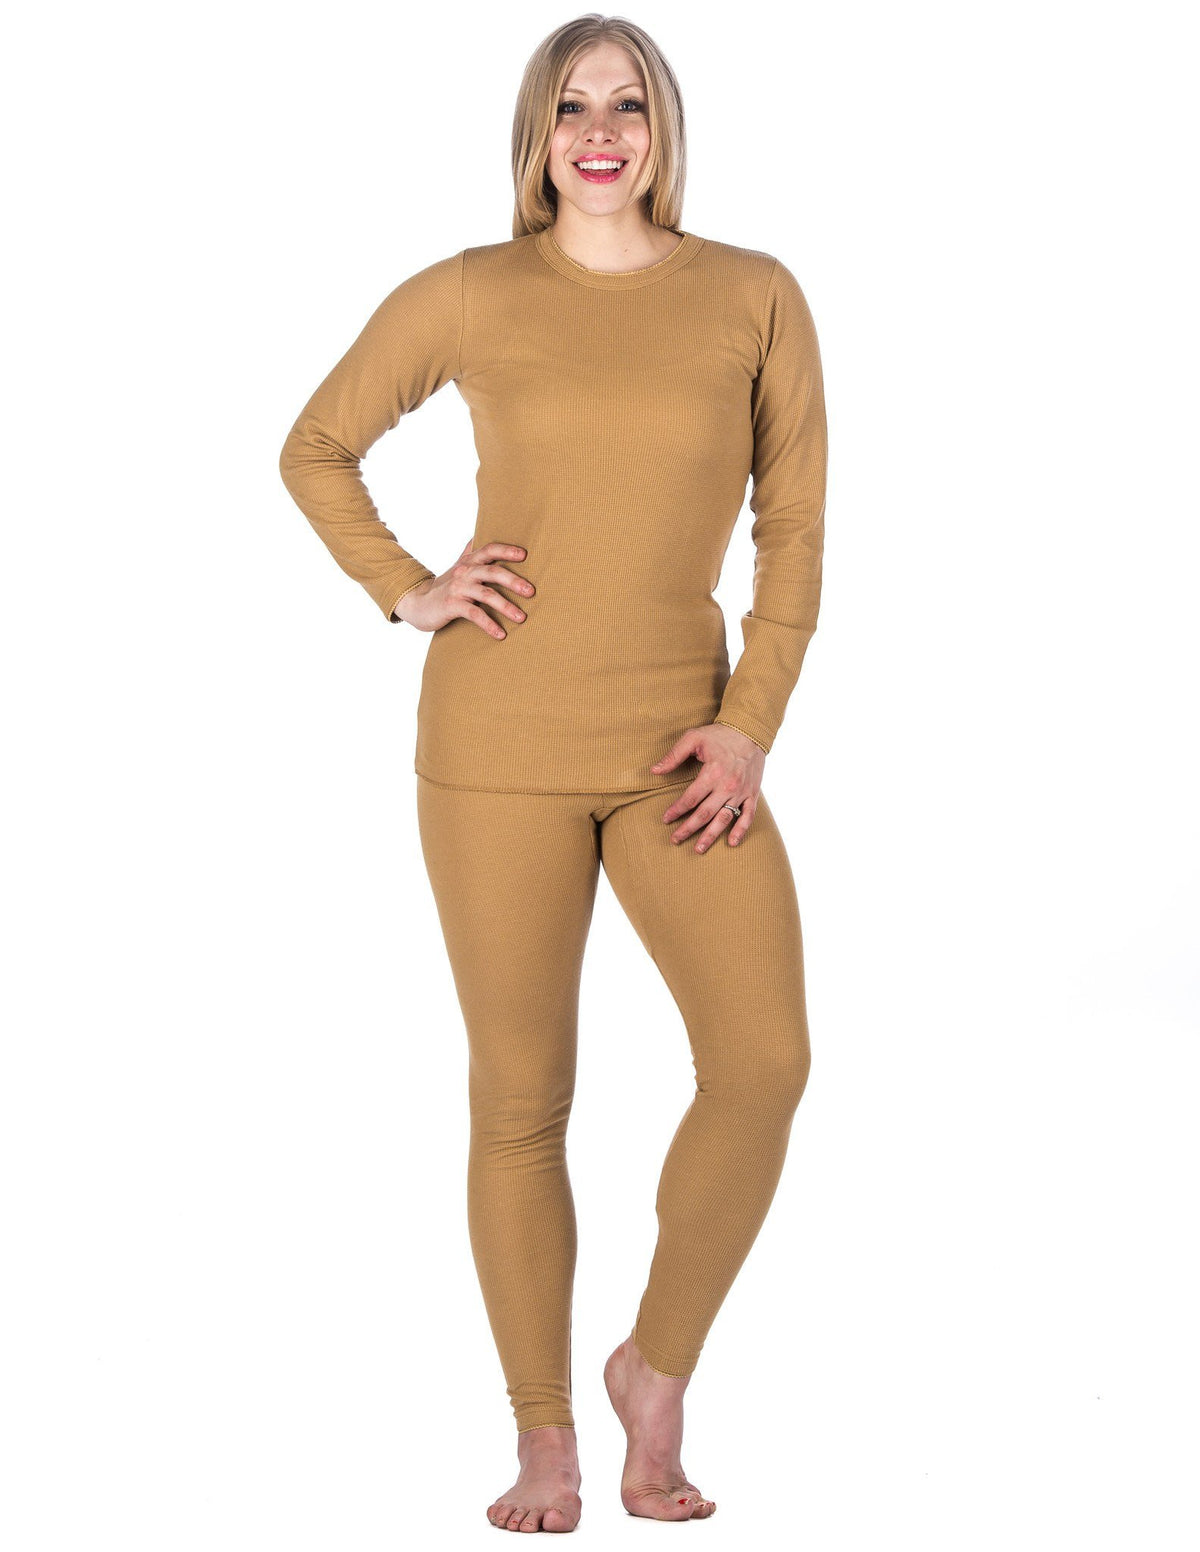 Women's Classic Waffle Knit Thermal Top and Bottom Set - Champagne